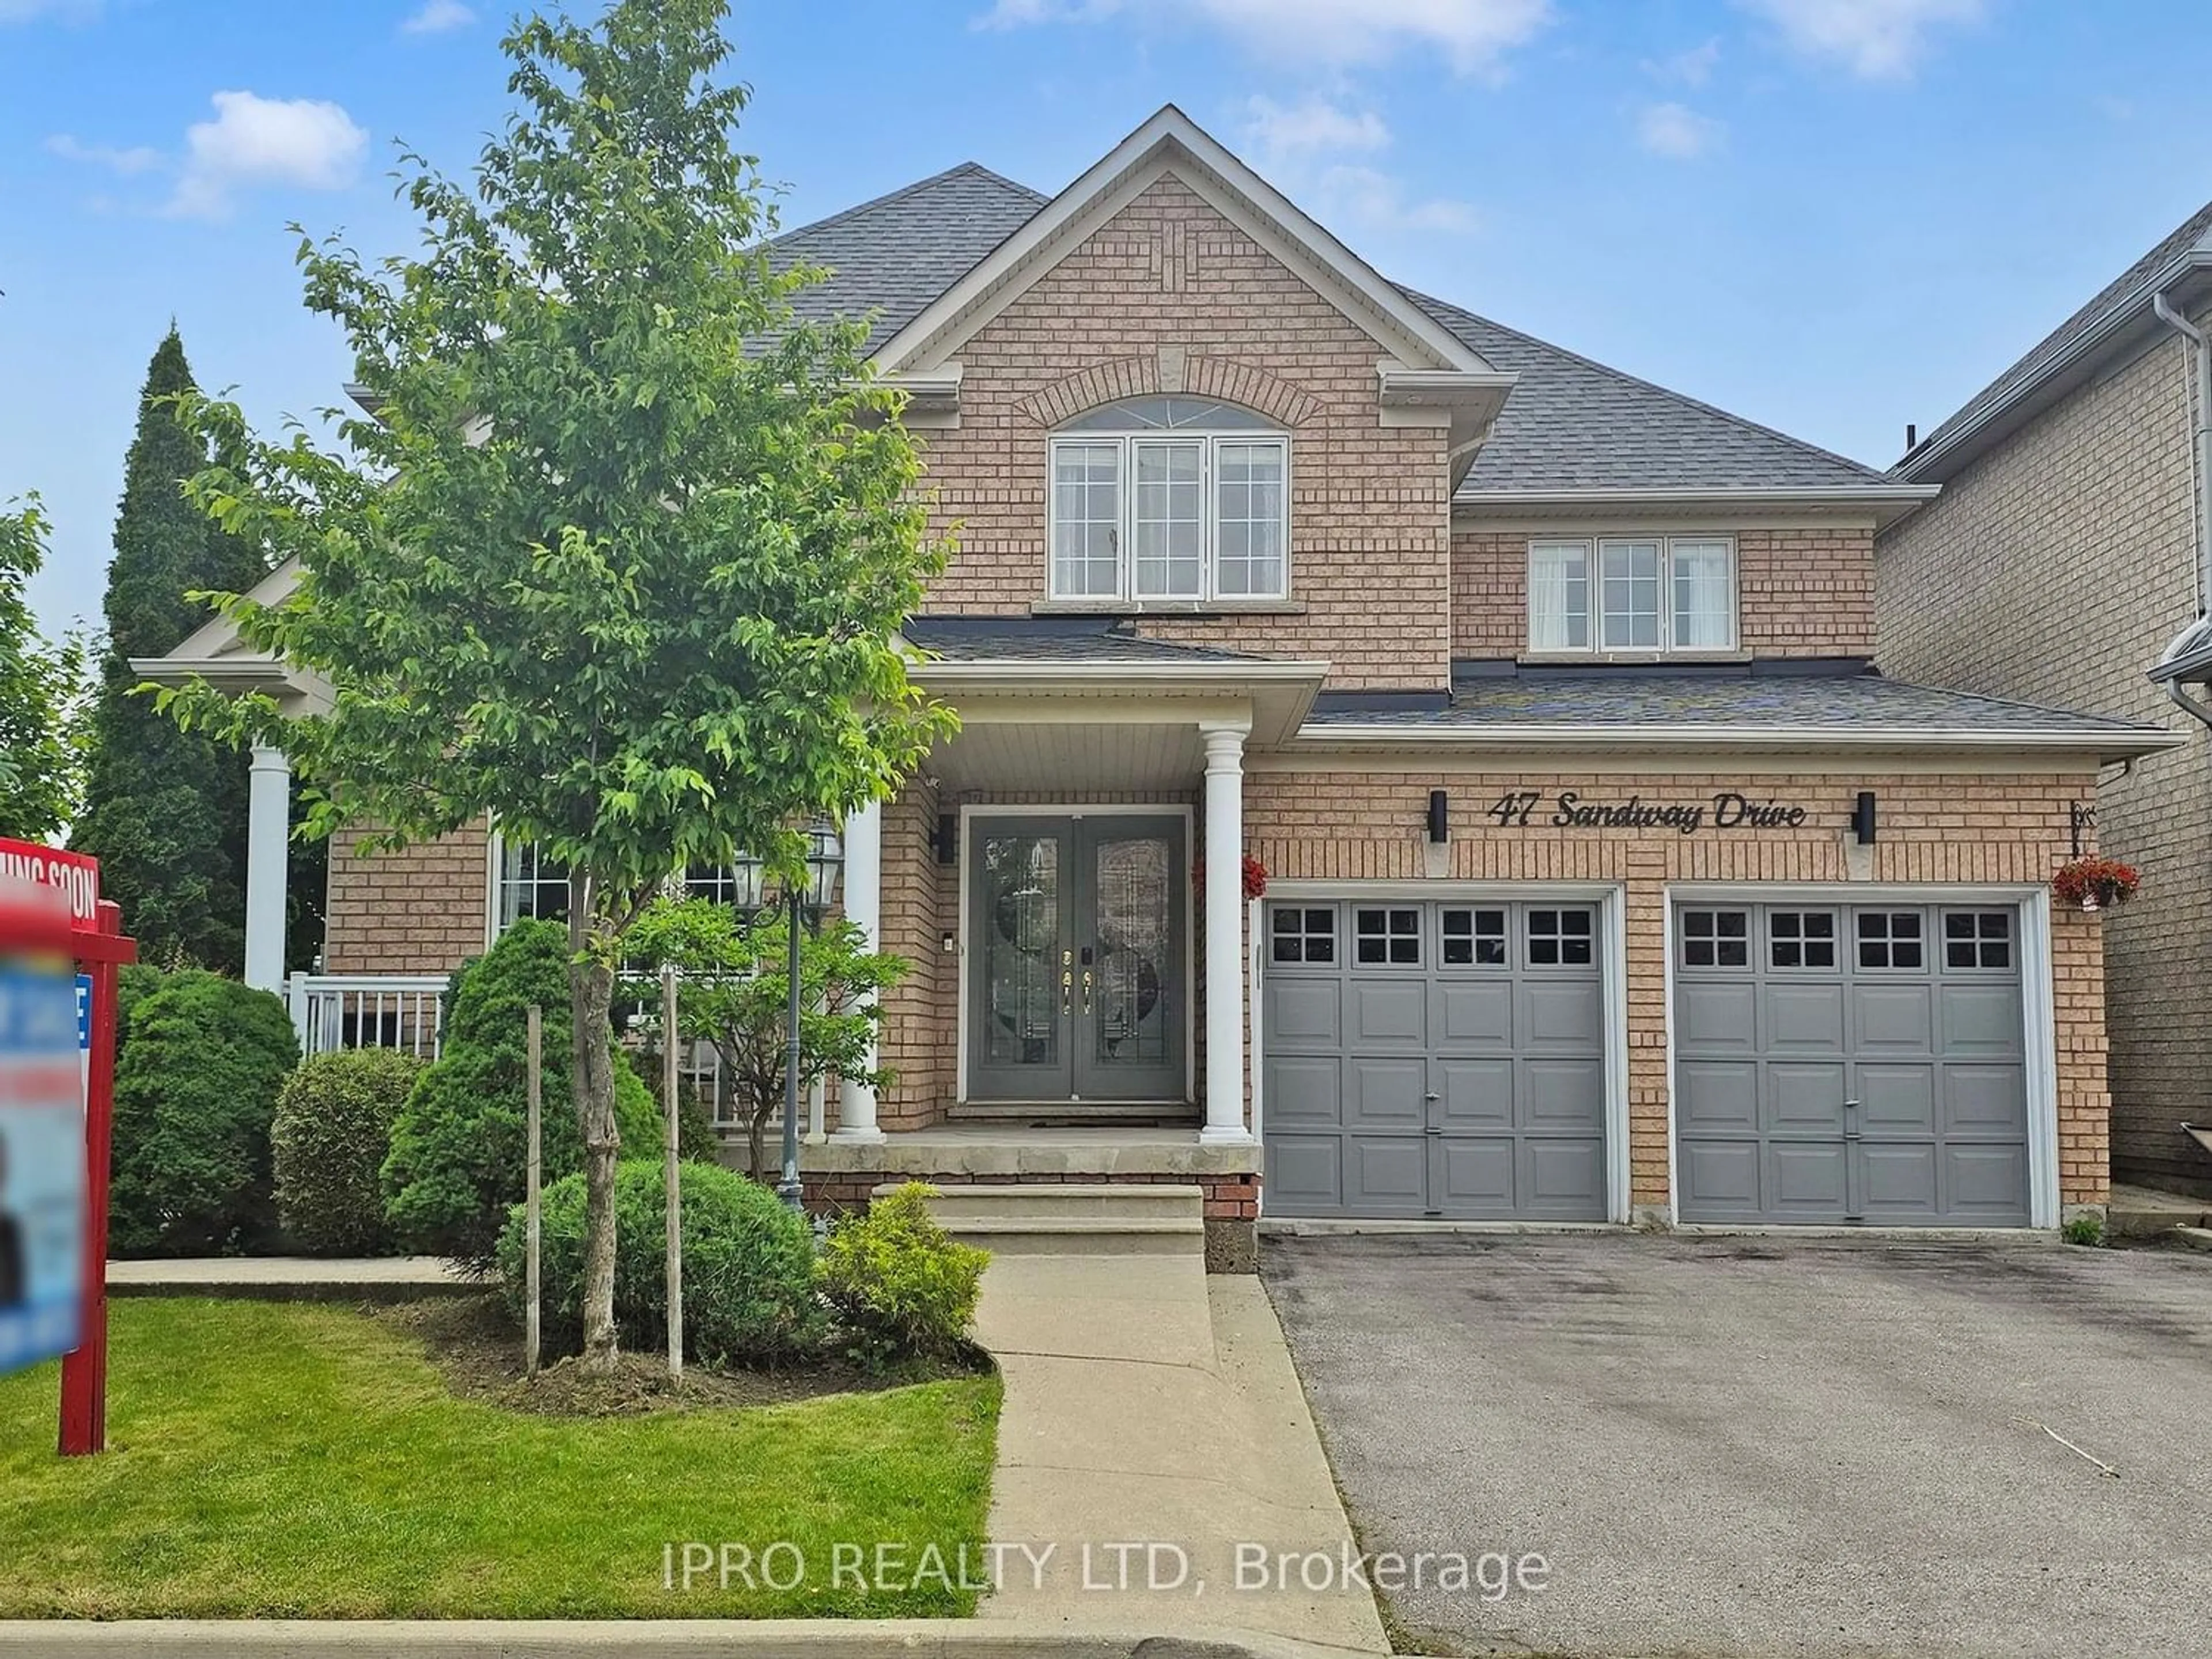 Home with brick exterior material for 47 Sandway Dr, Brampton Ontario L7A 2T8